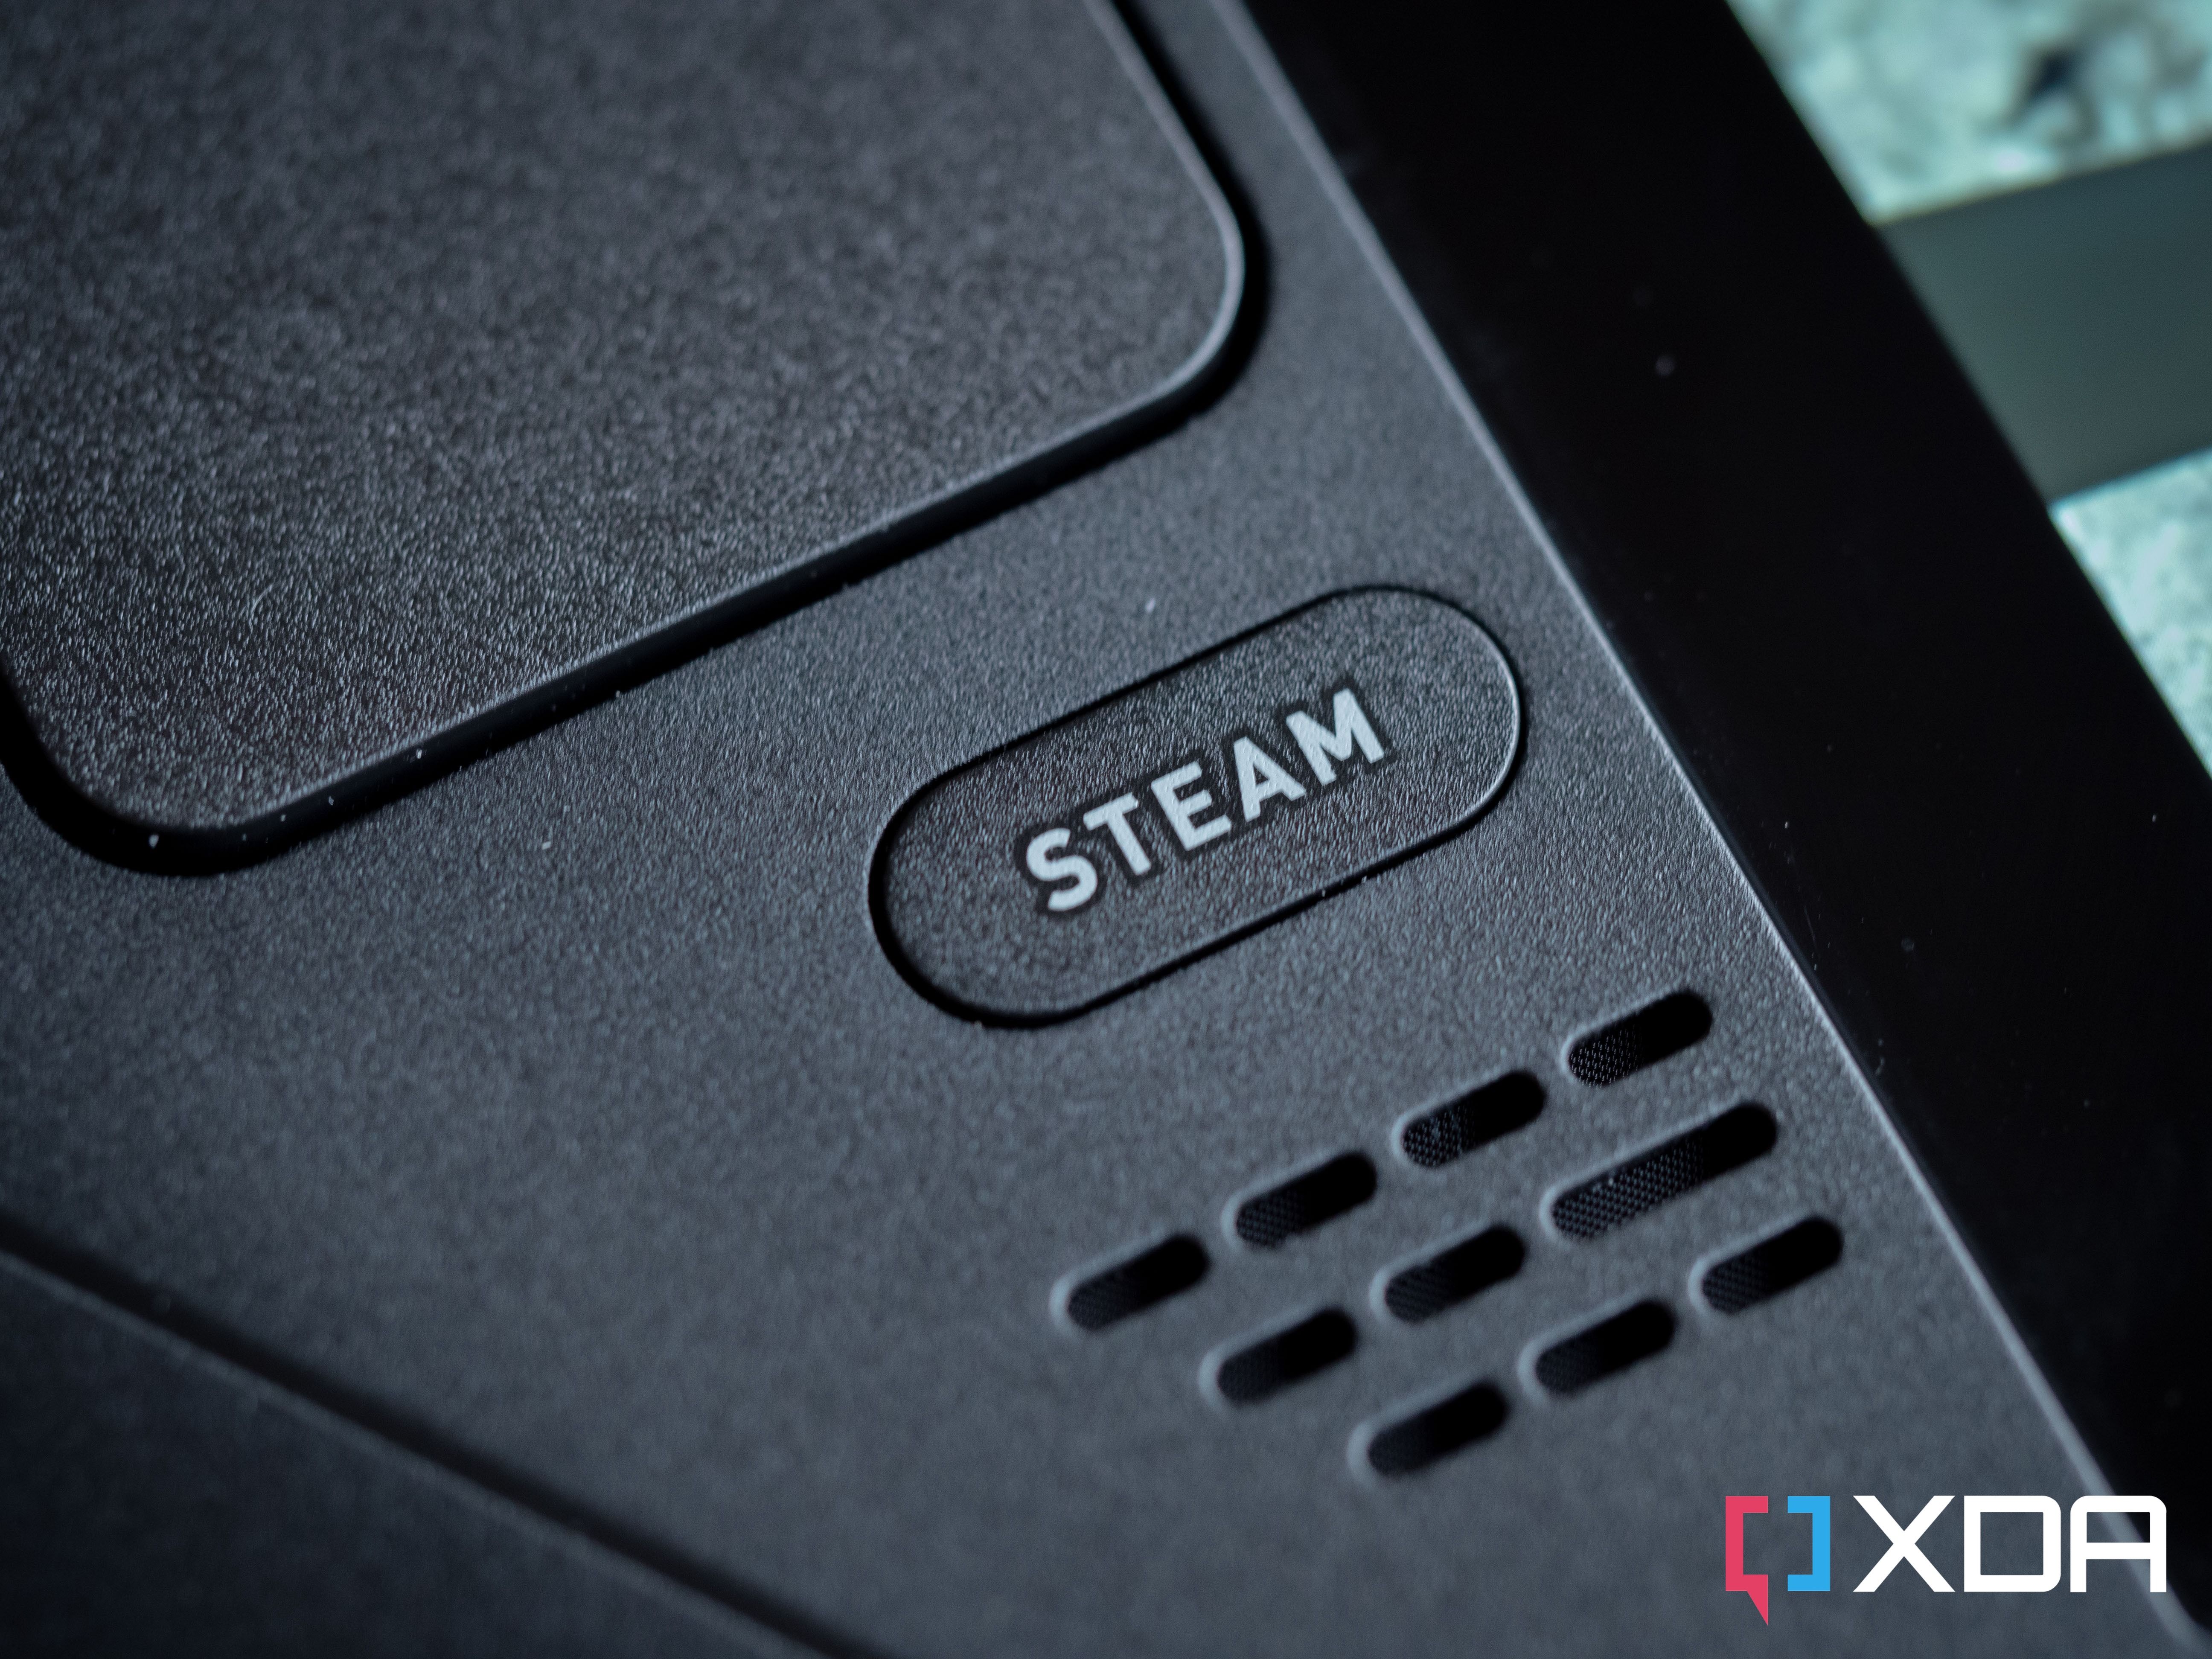 Steam Deck accessory manufacturer Jsaux teases a new back cover